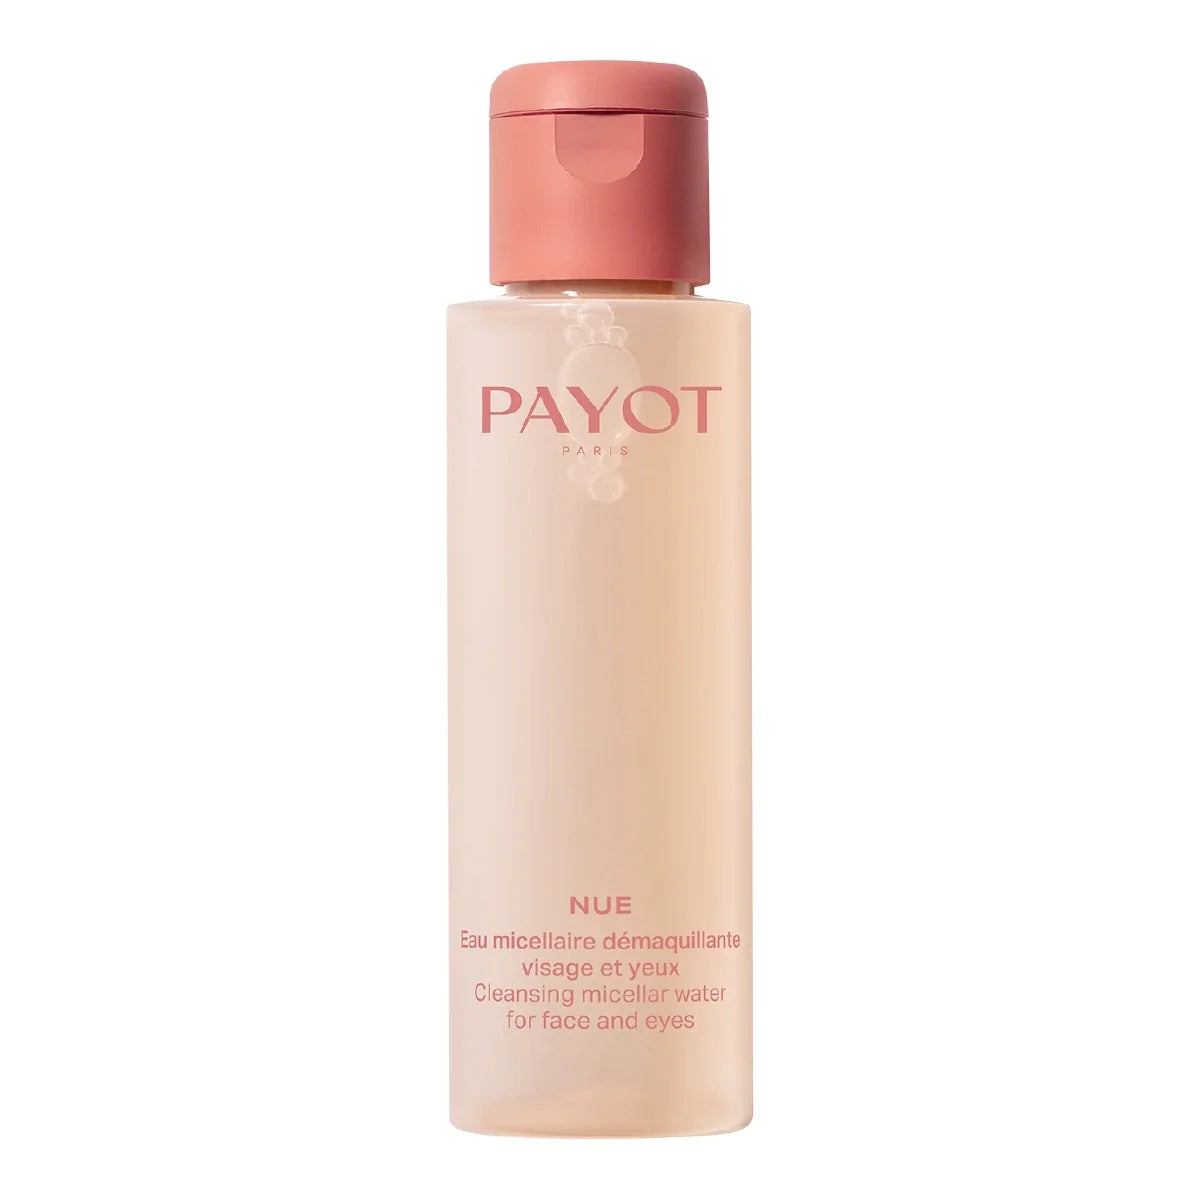 Payot NUE Eau Micellaire Demaquillant 100ml Travel Size